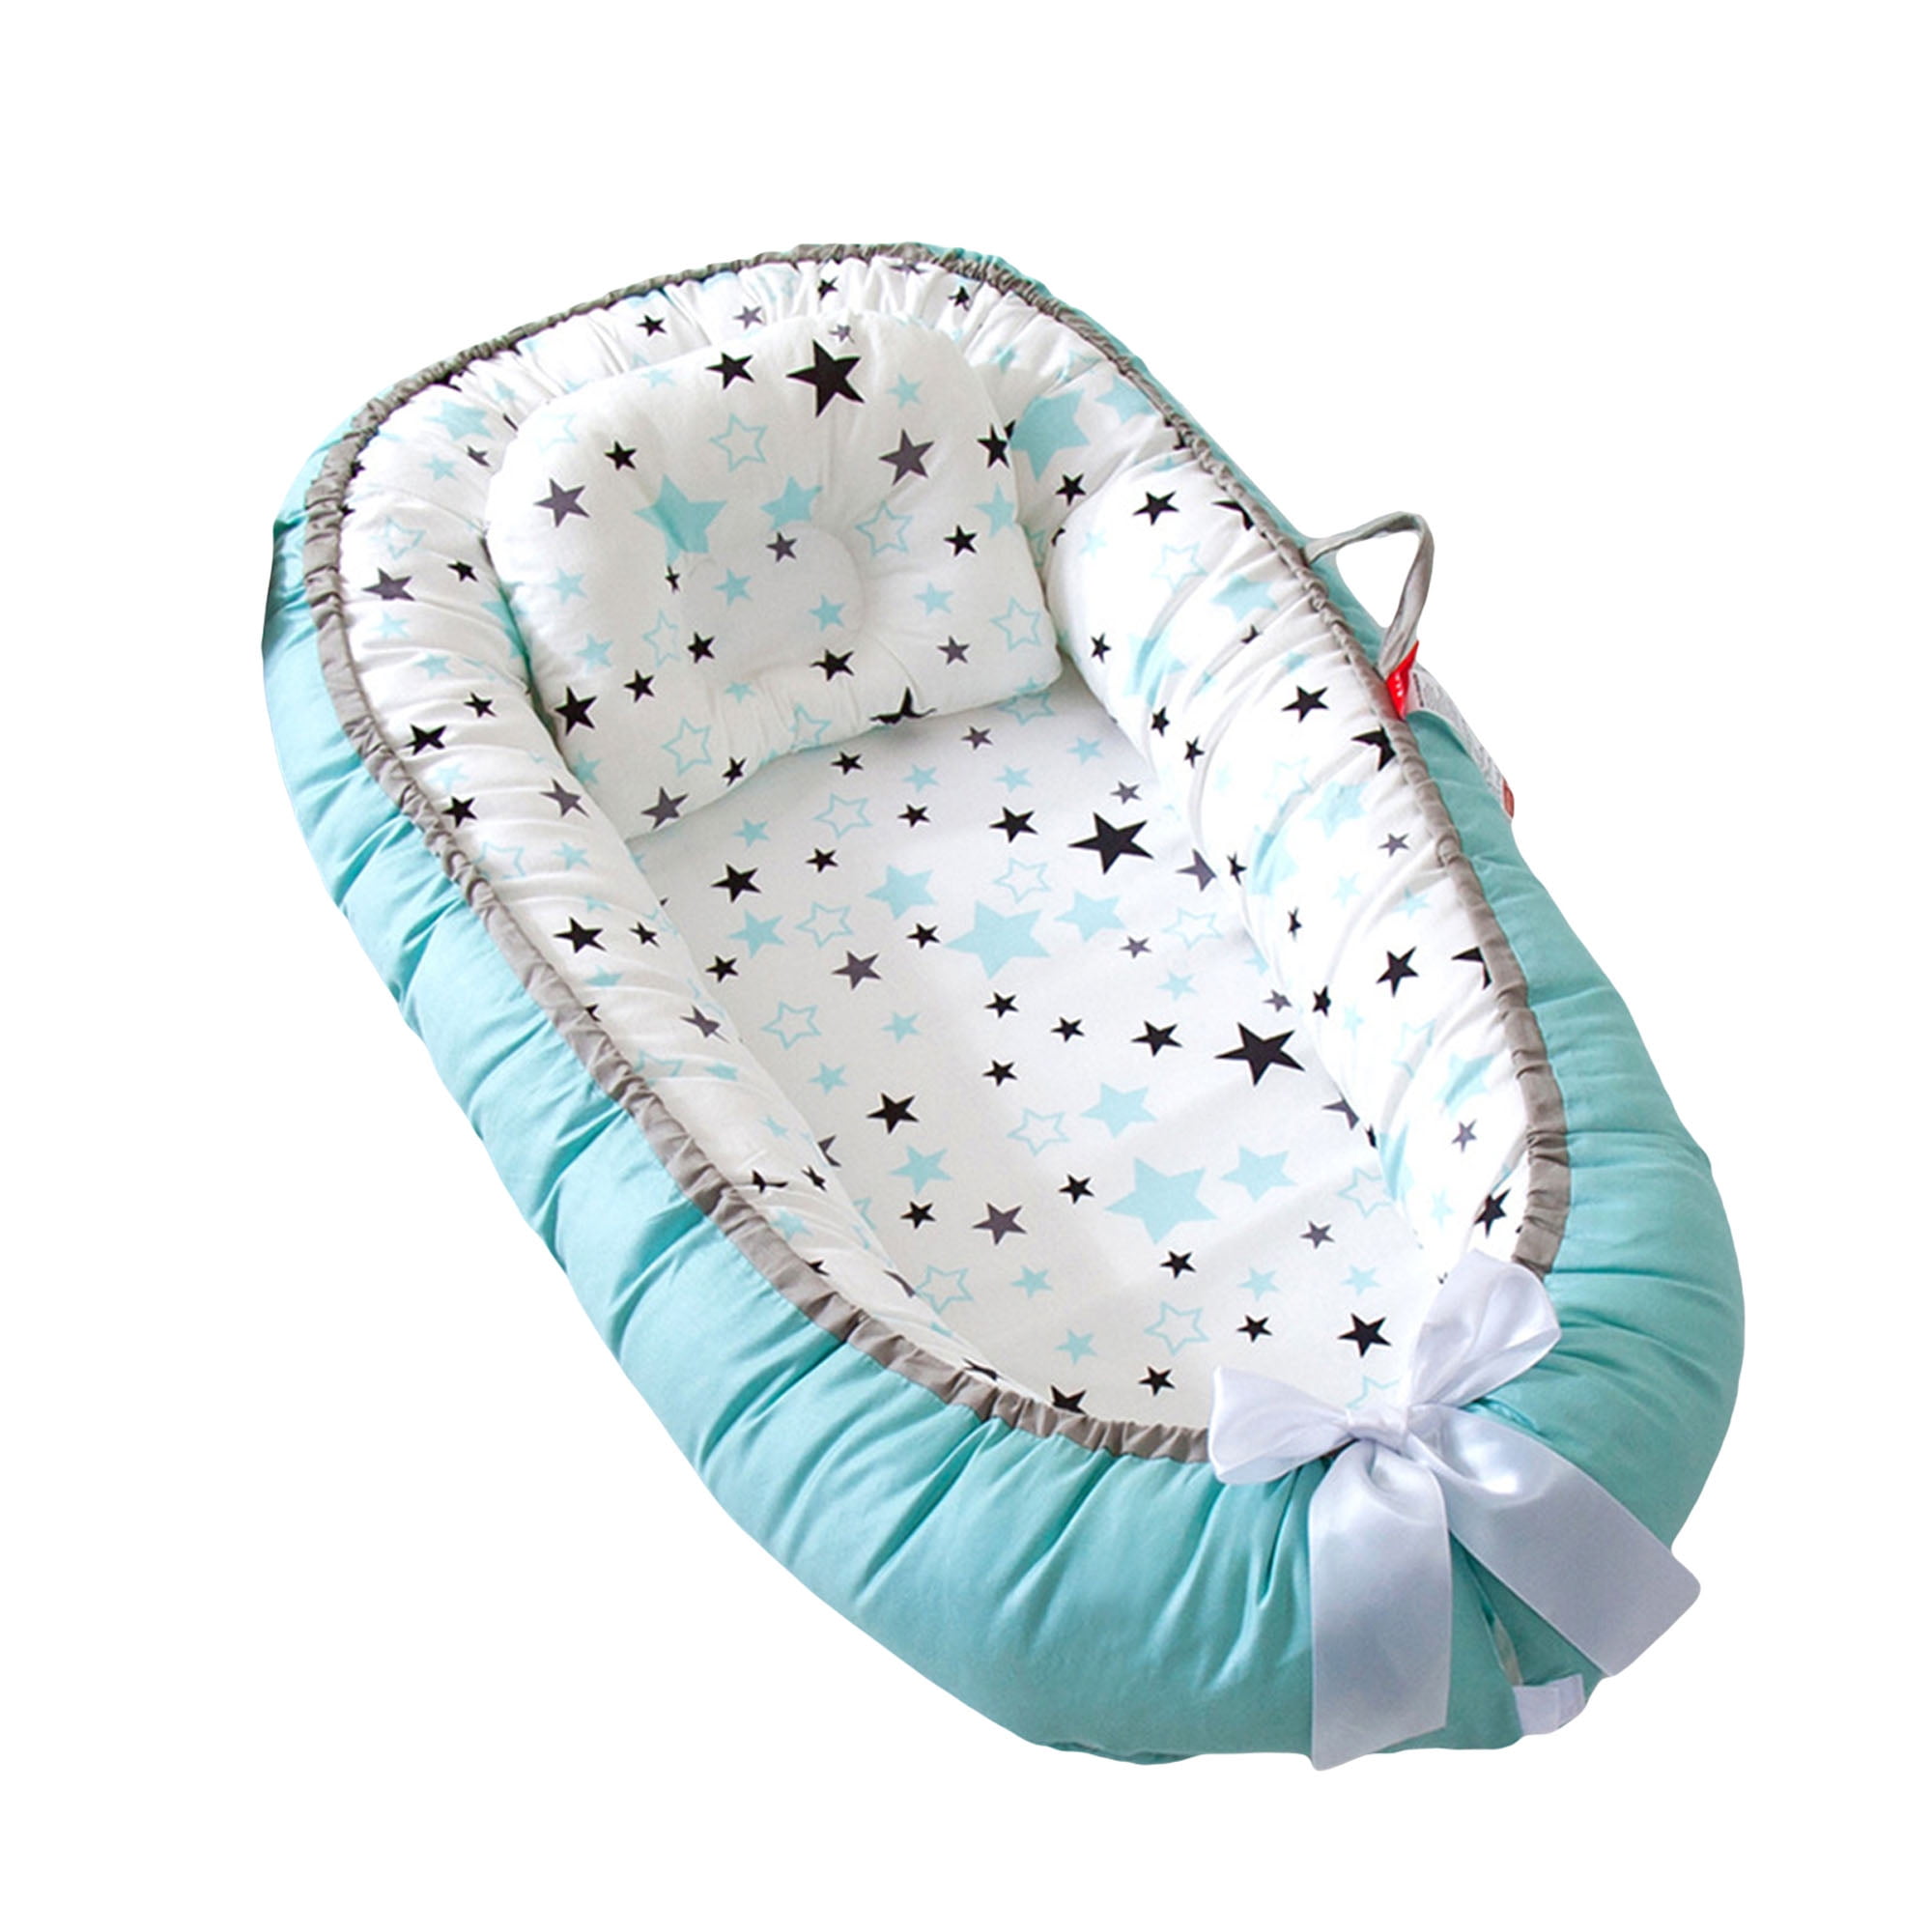 Mint mattress cocoon 100% cotton Multifunctional baby nest for Newborn Snuggle Pod Soft and safe lounger bassinet sleeping travel cot mat 